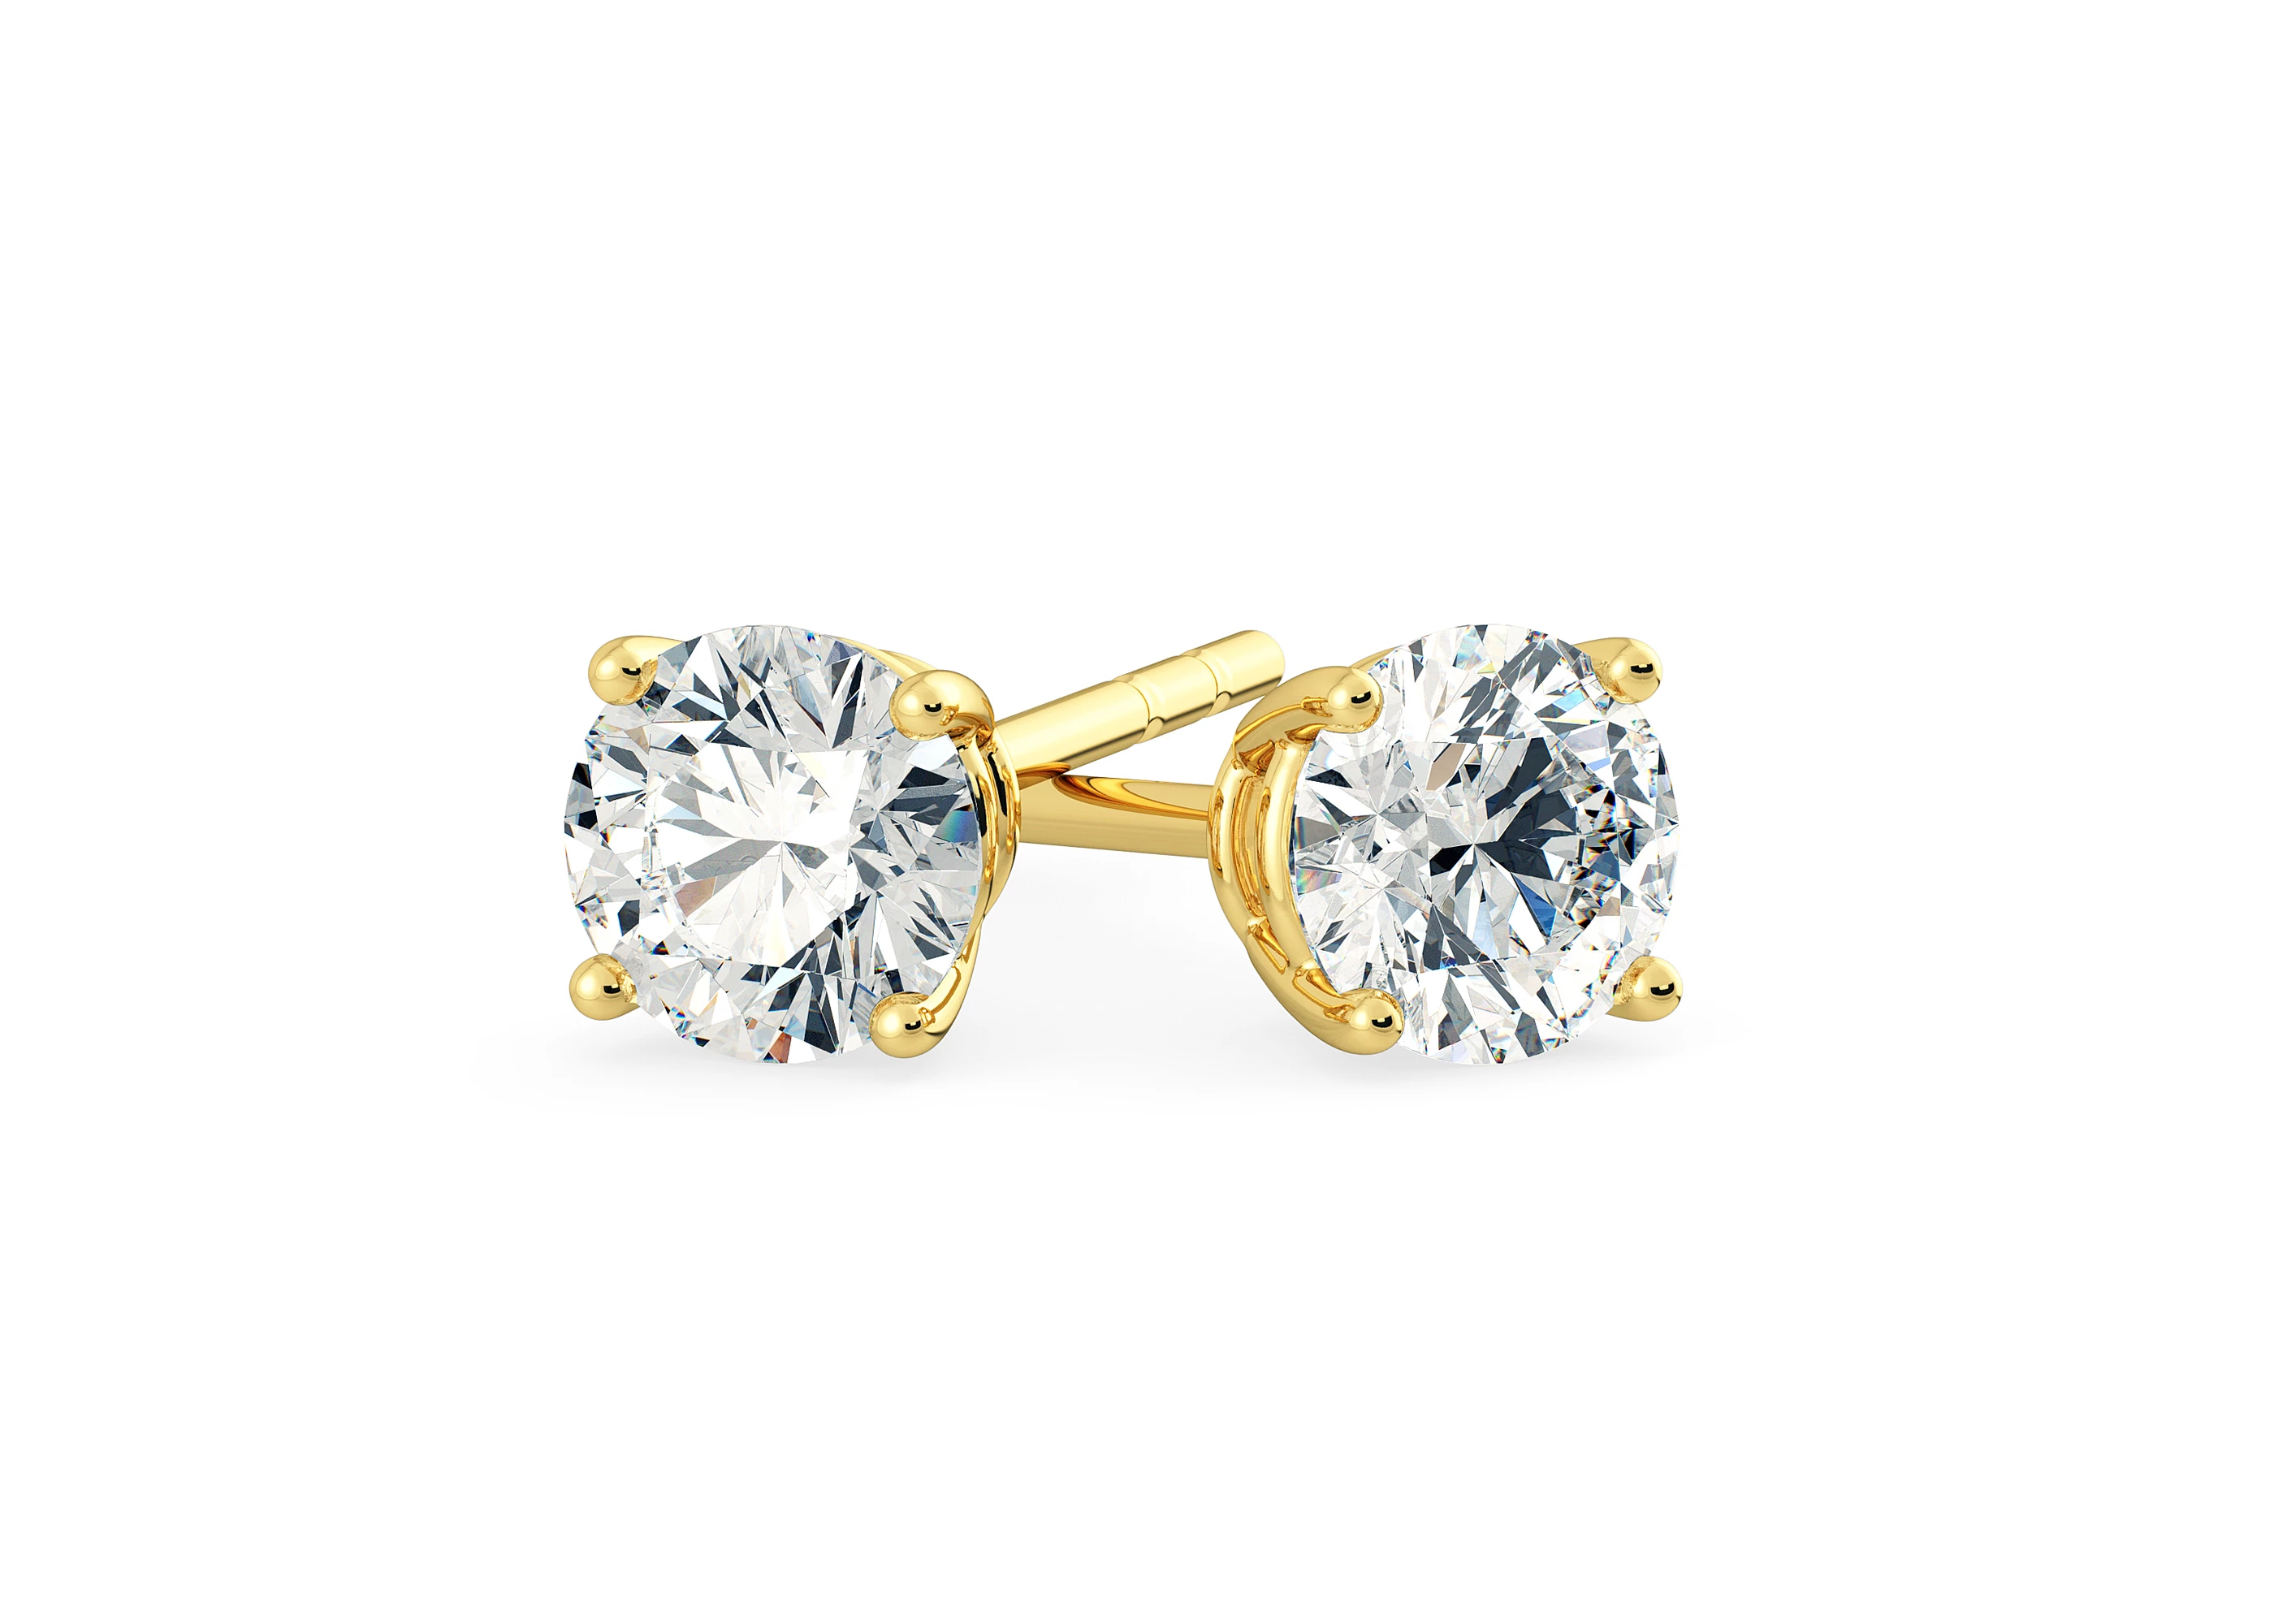 Ettore Round Brilliant Diamond Stud Earrings in 18K Yellow Gold with Butterfly Backs